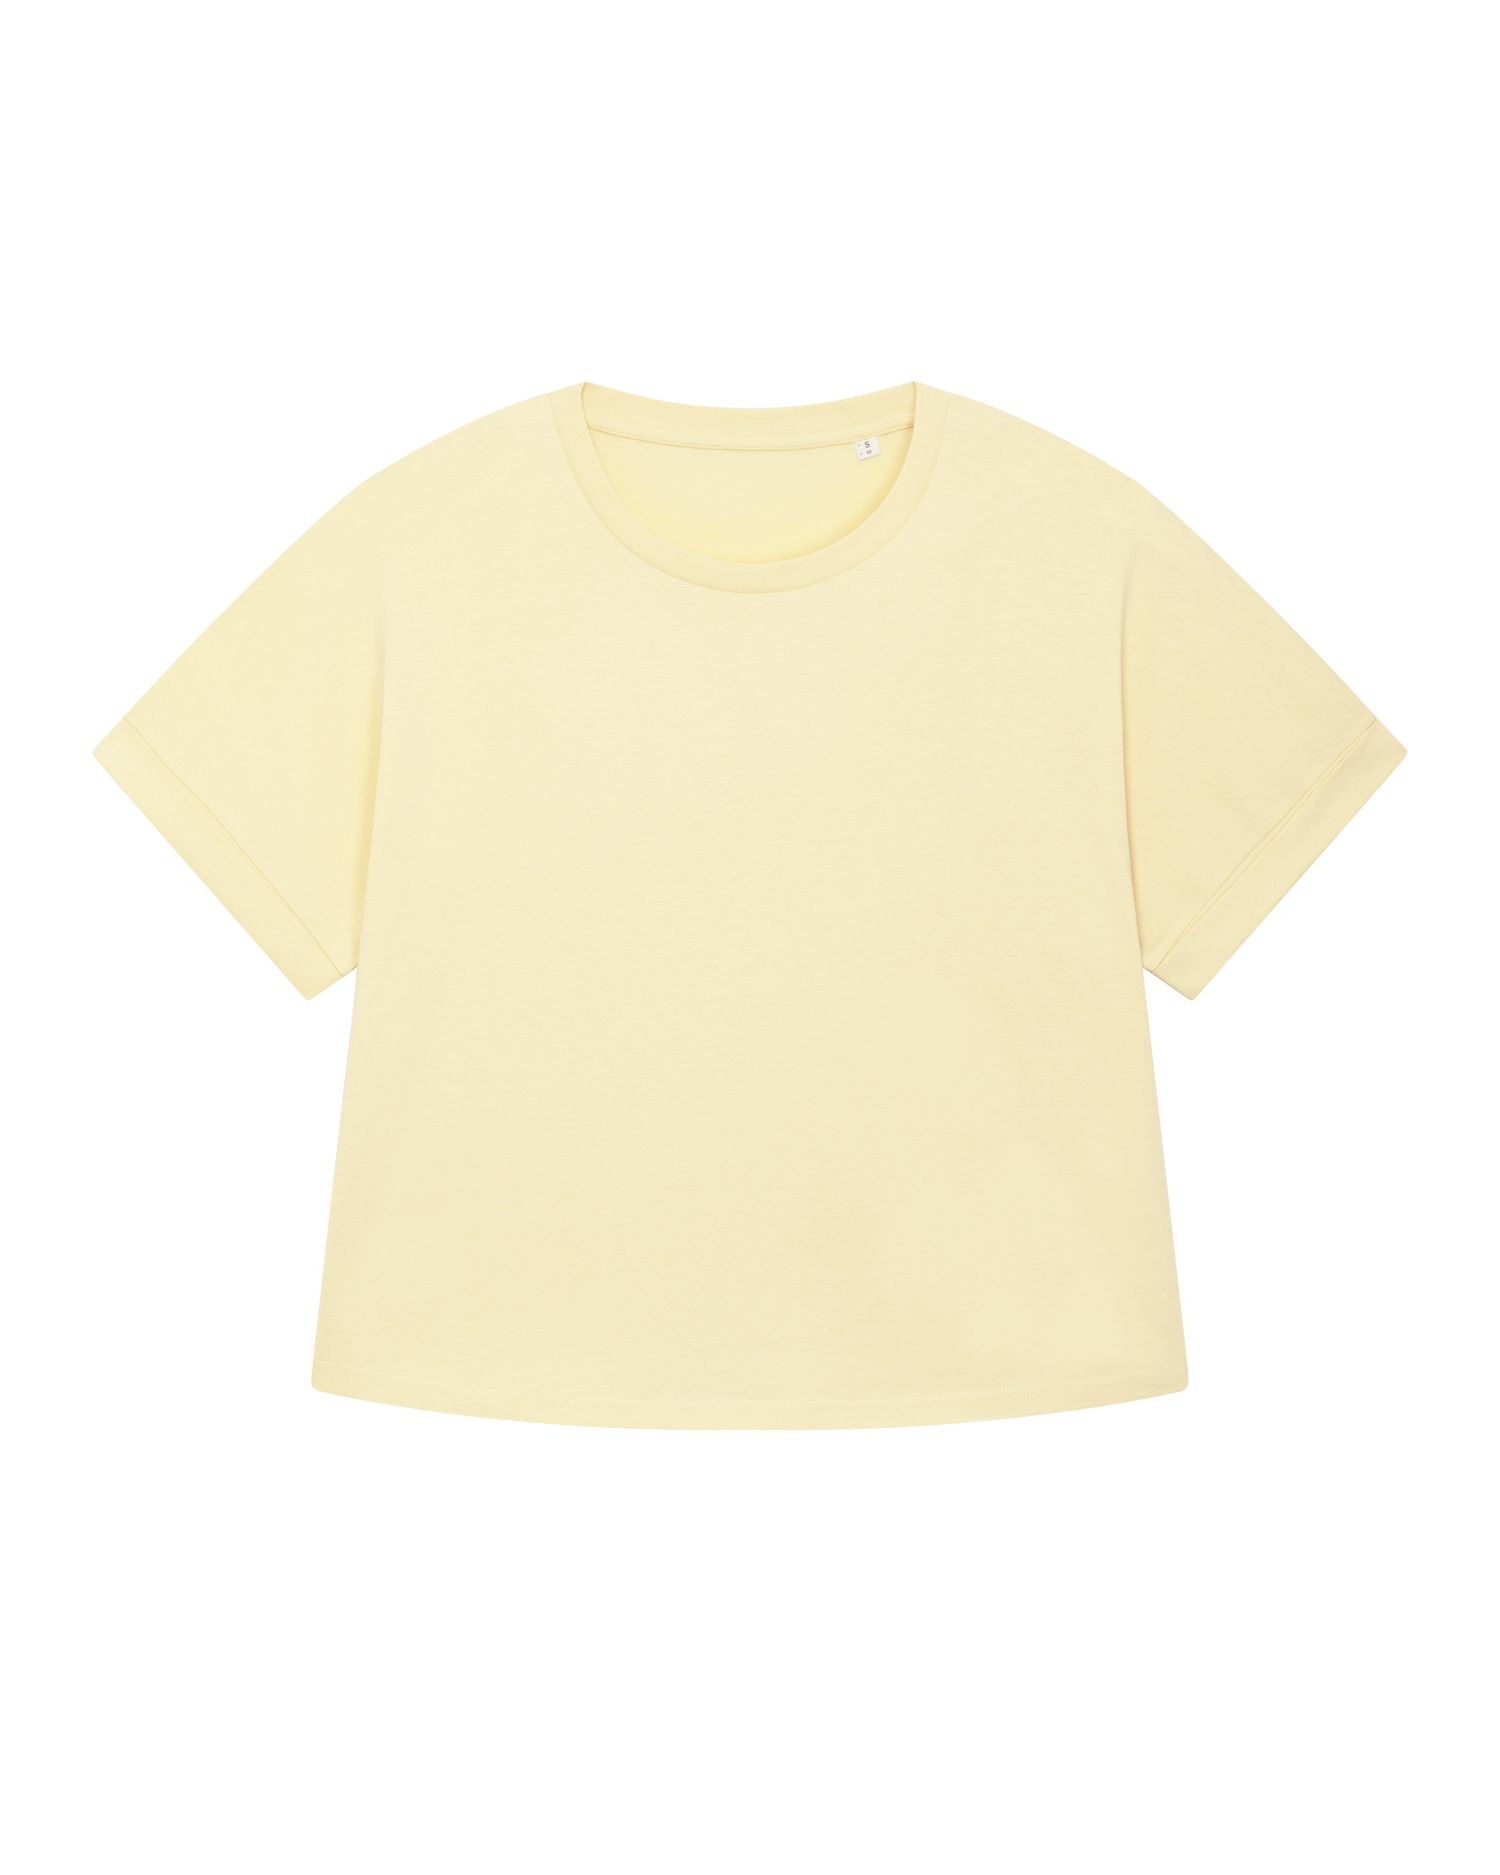 T-Shirt Stella Collider in Farbe Butter